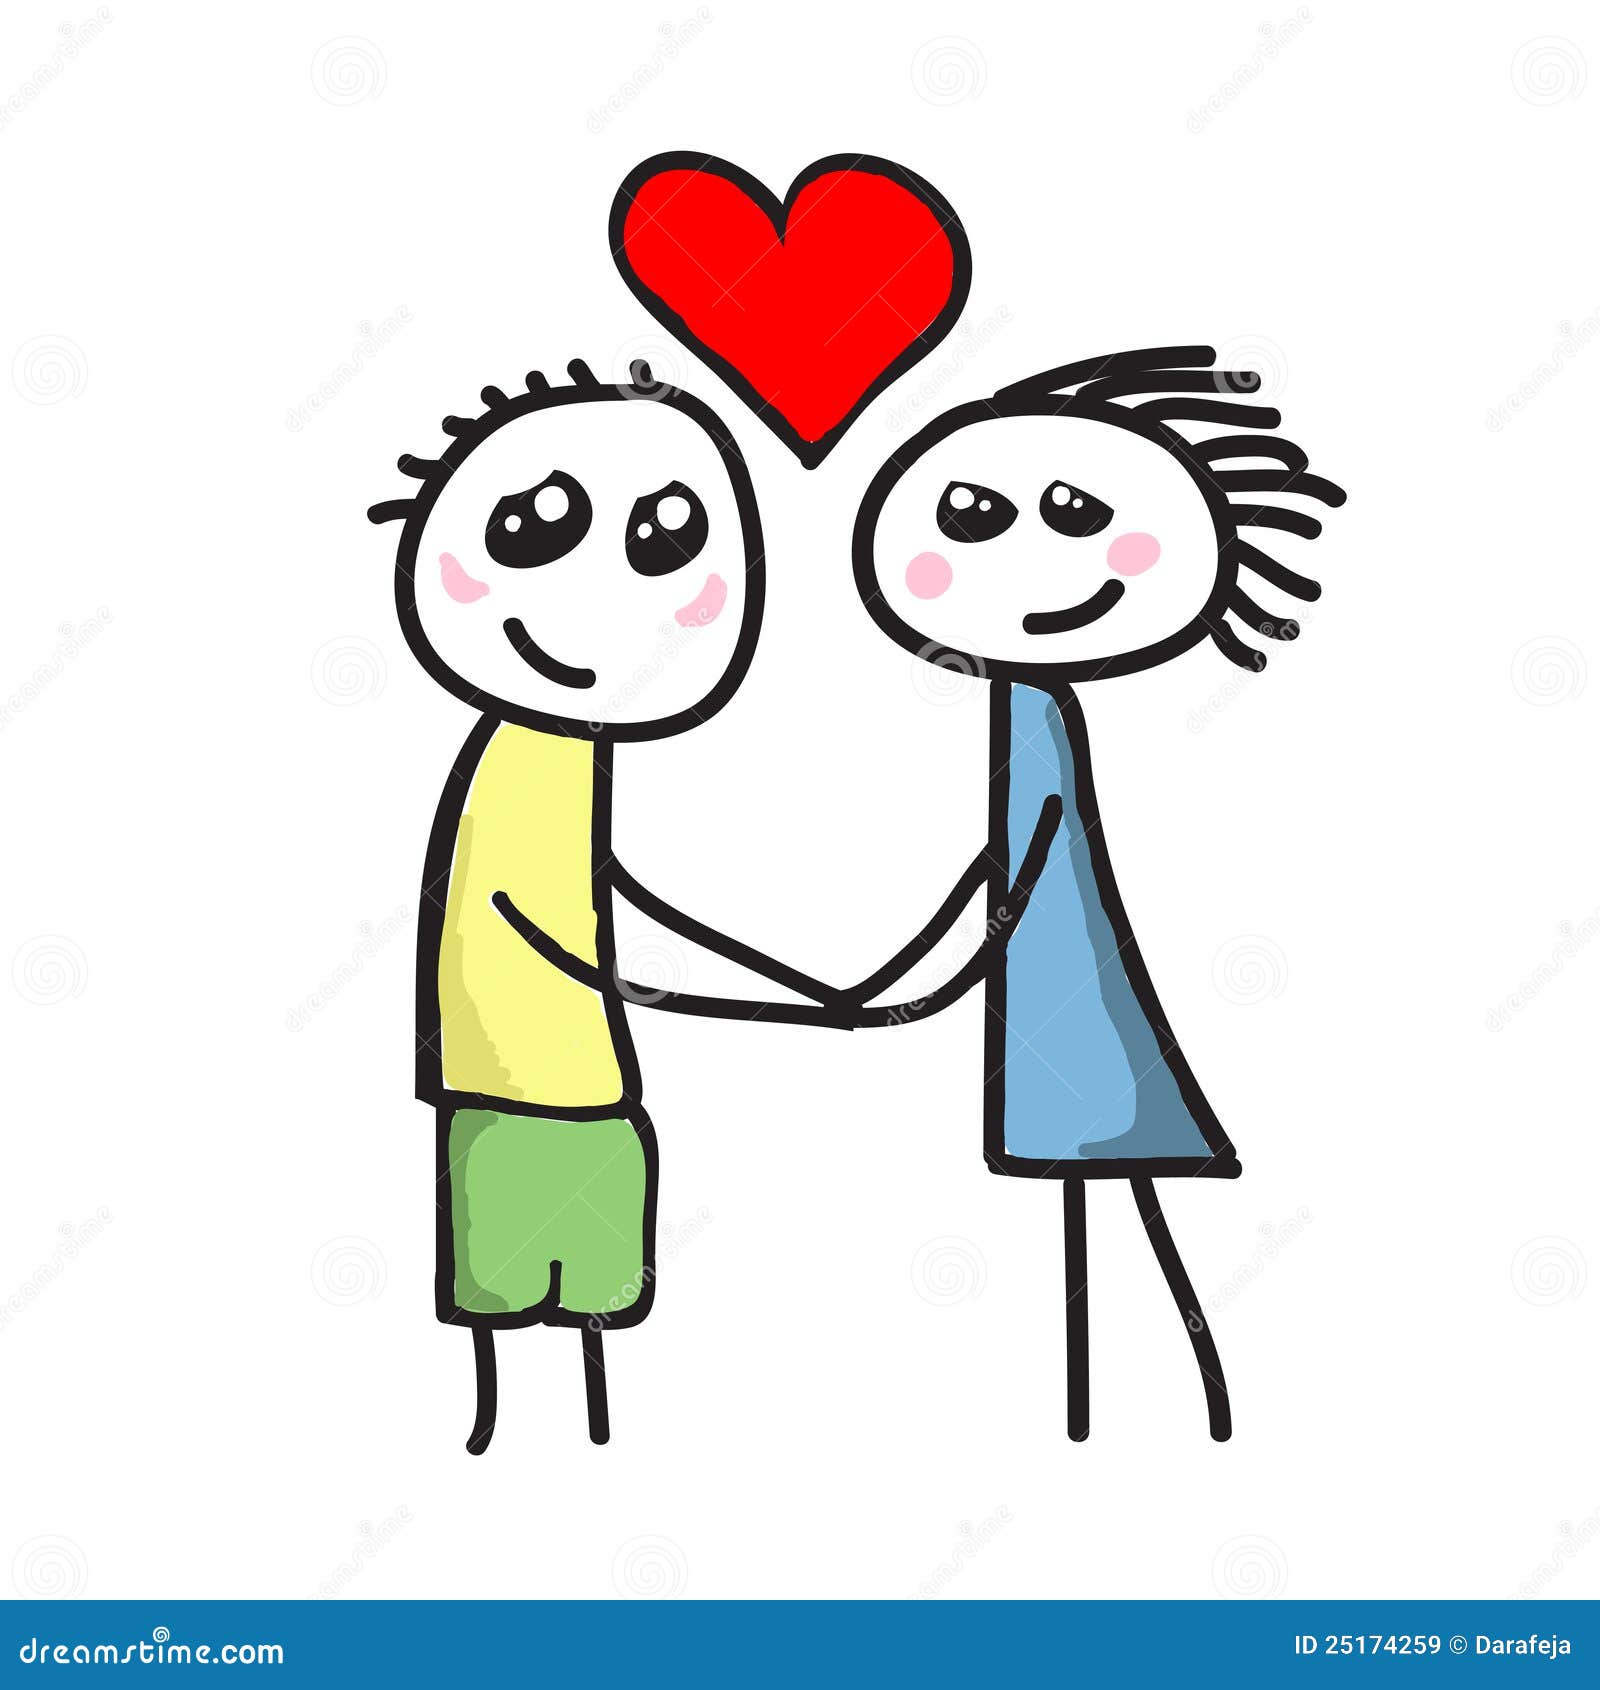 boy and girl holding hands clipart - photo #48